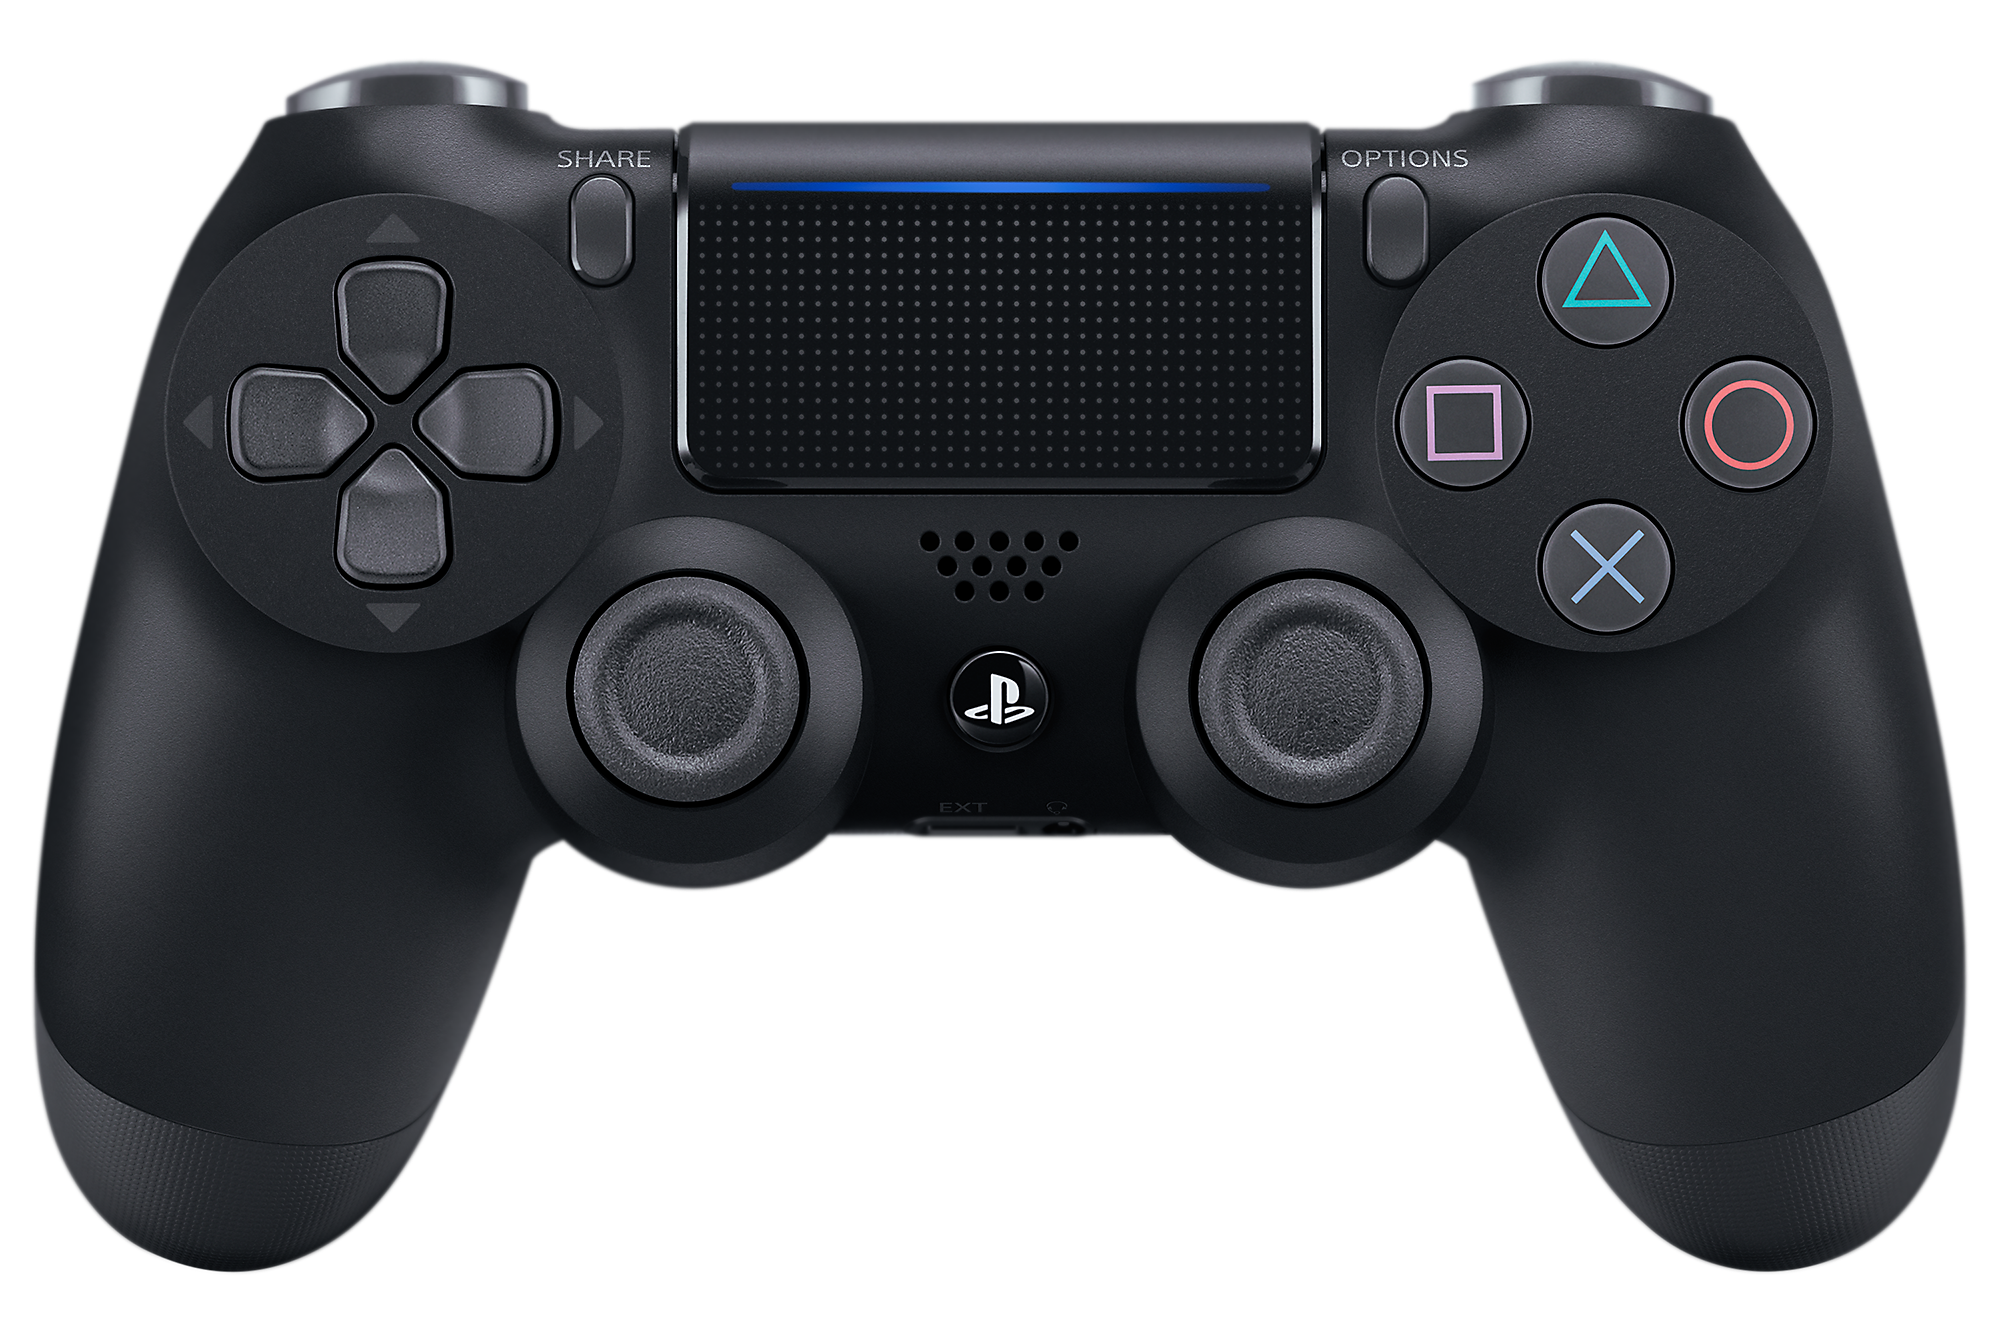 Rent Sony PlayStation Dualsense Controller from €5.90 per month